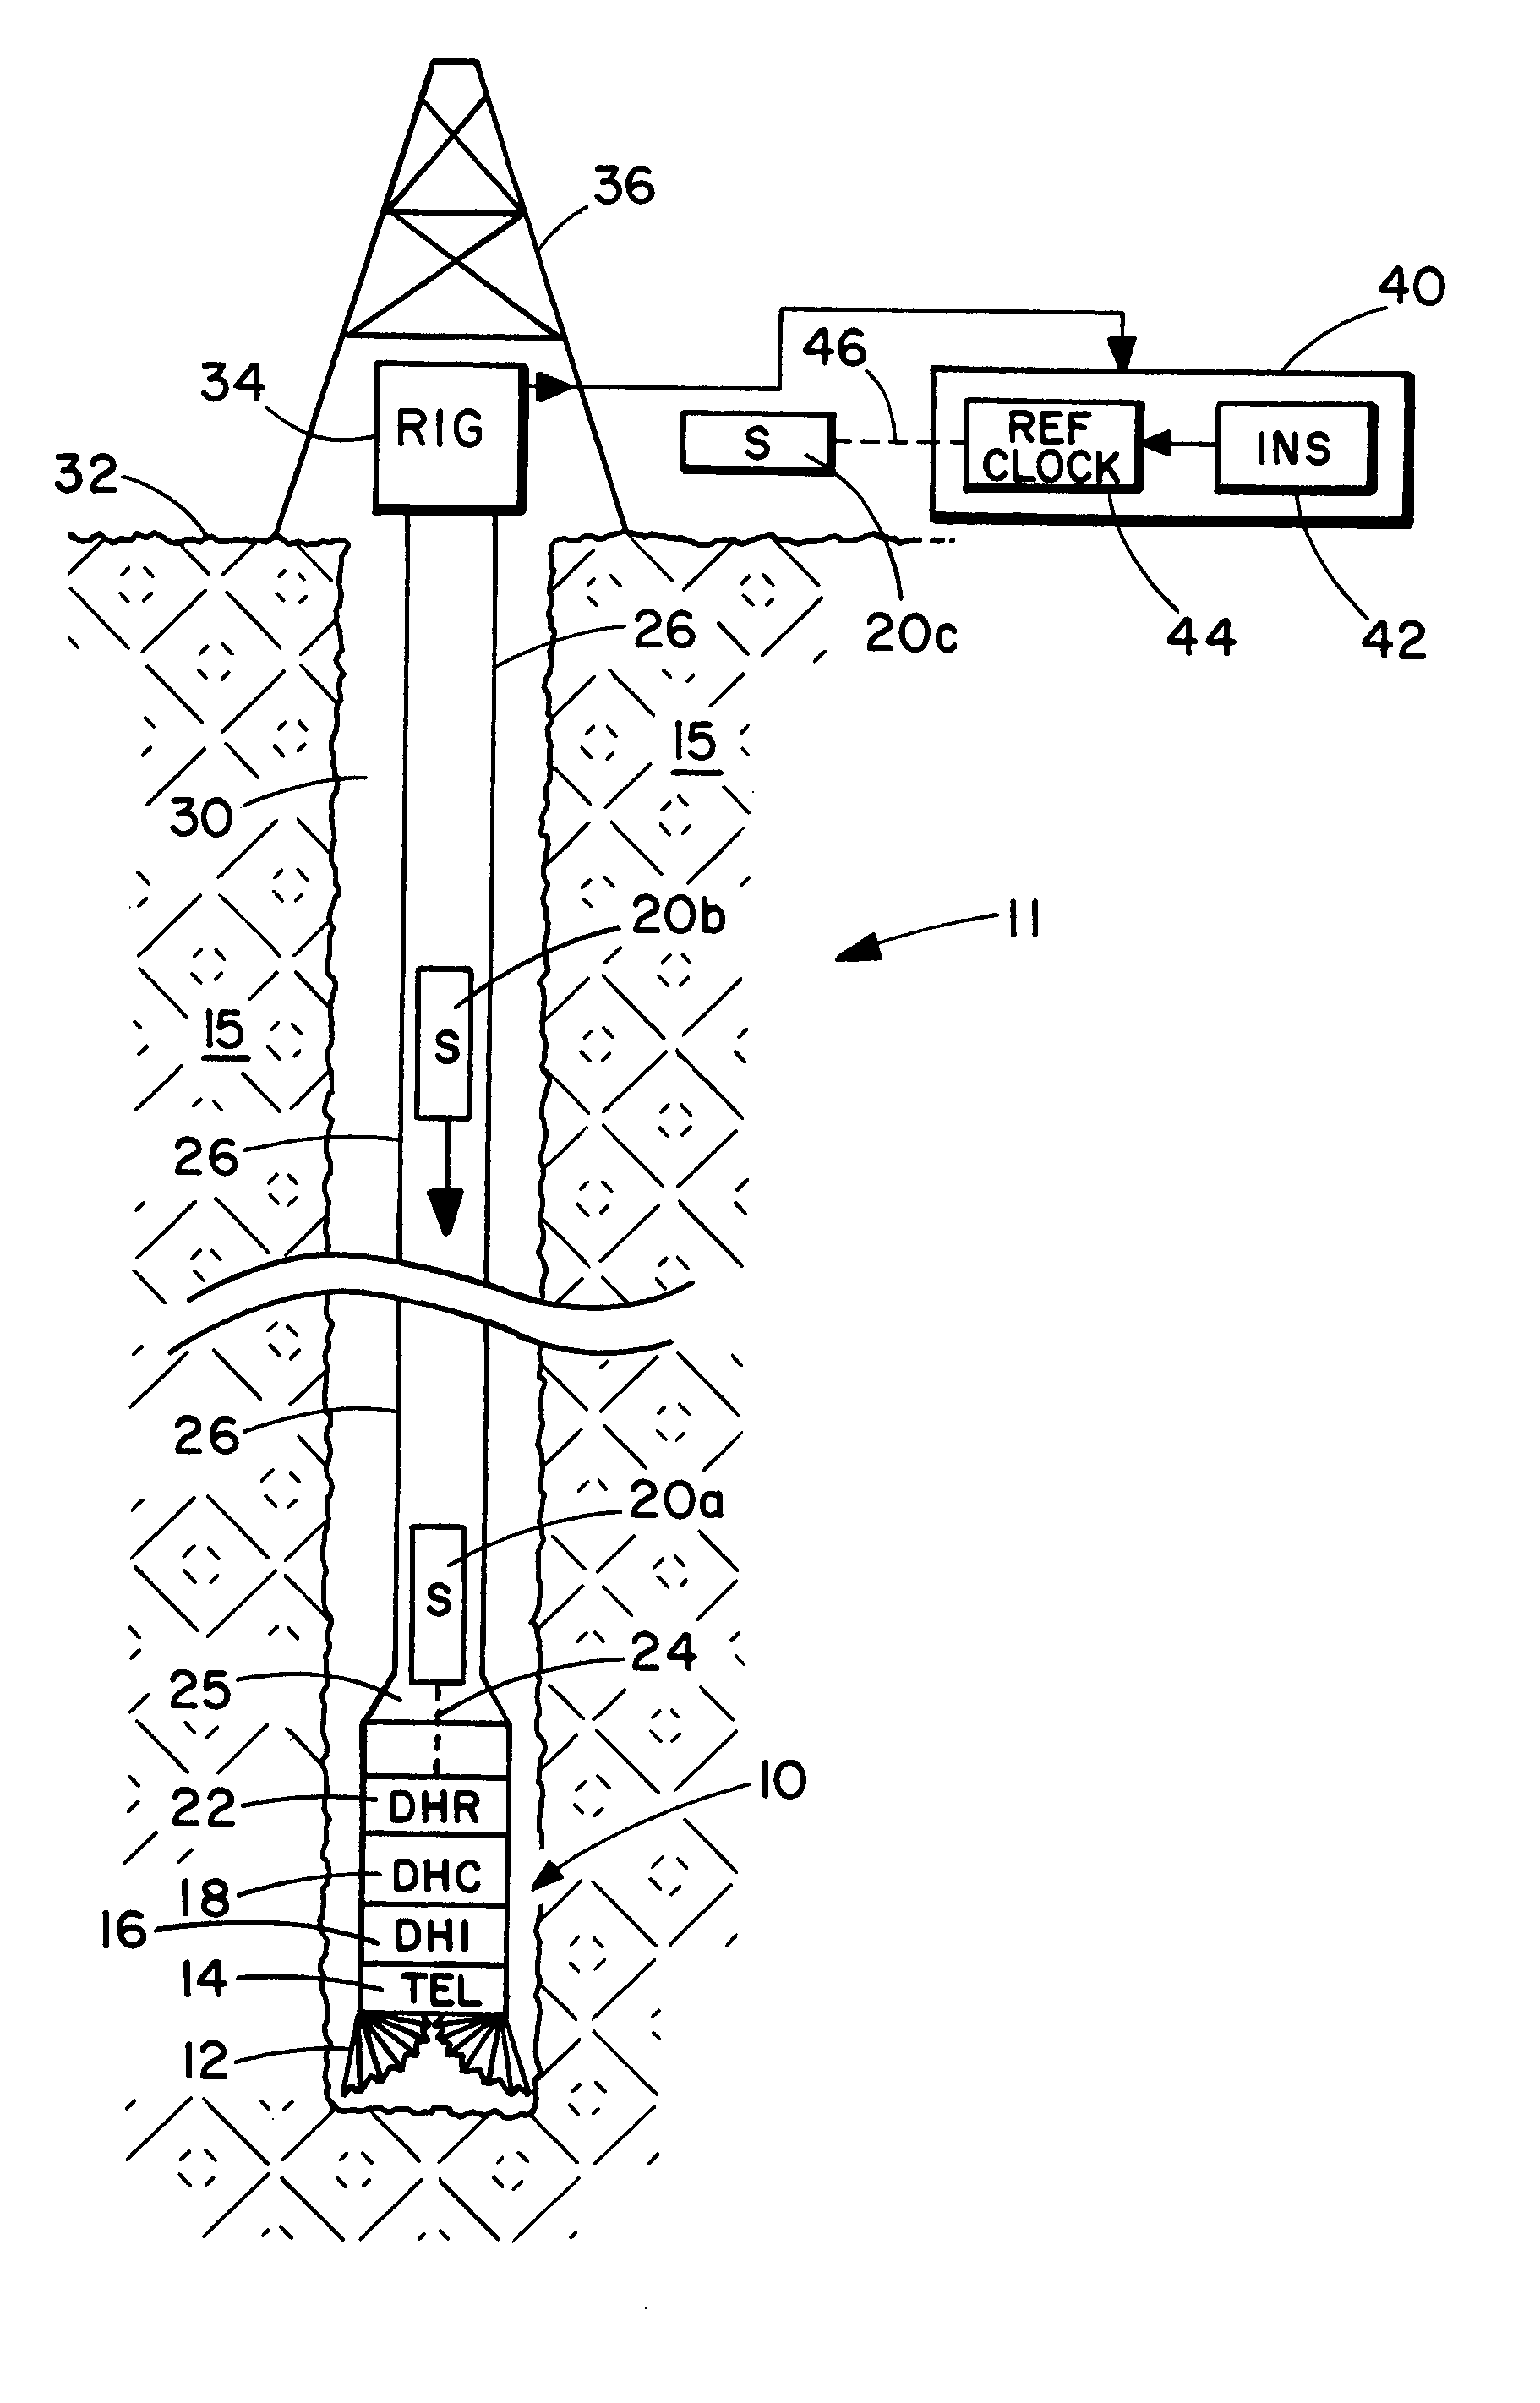 Downhole clock synchronization apparatus and methods for use in a borehole drilling environment